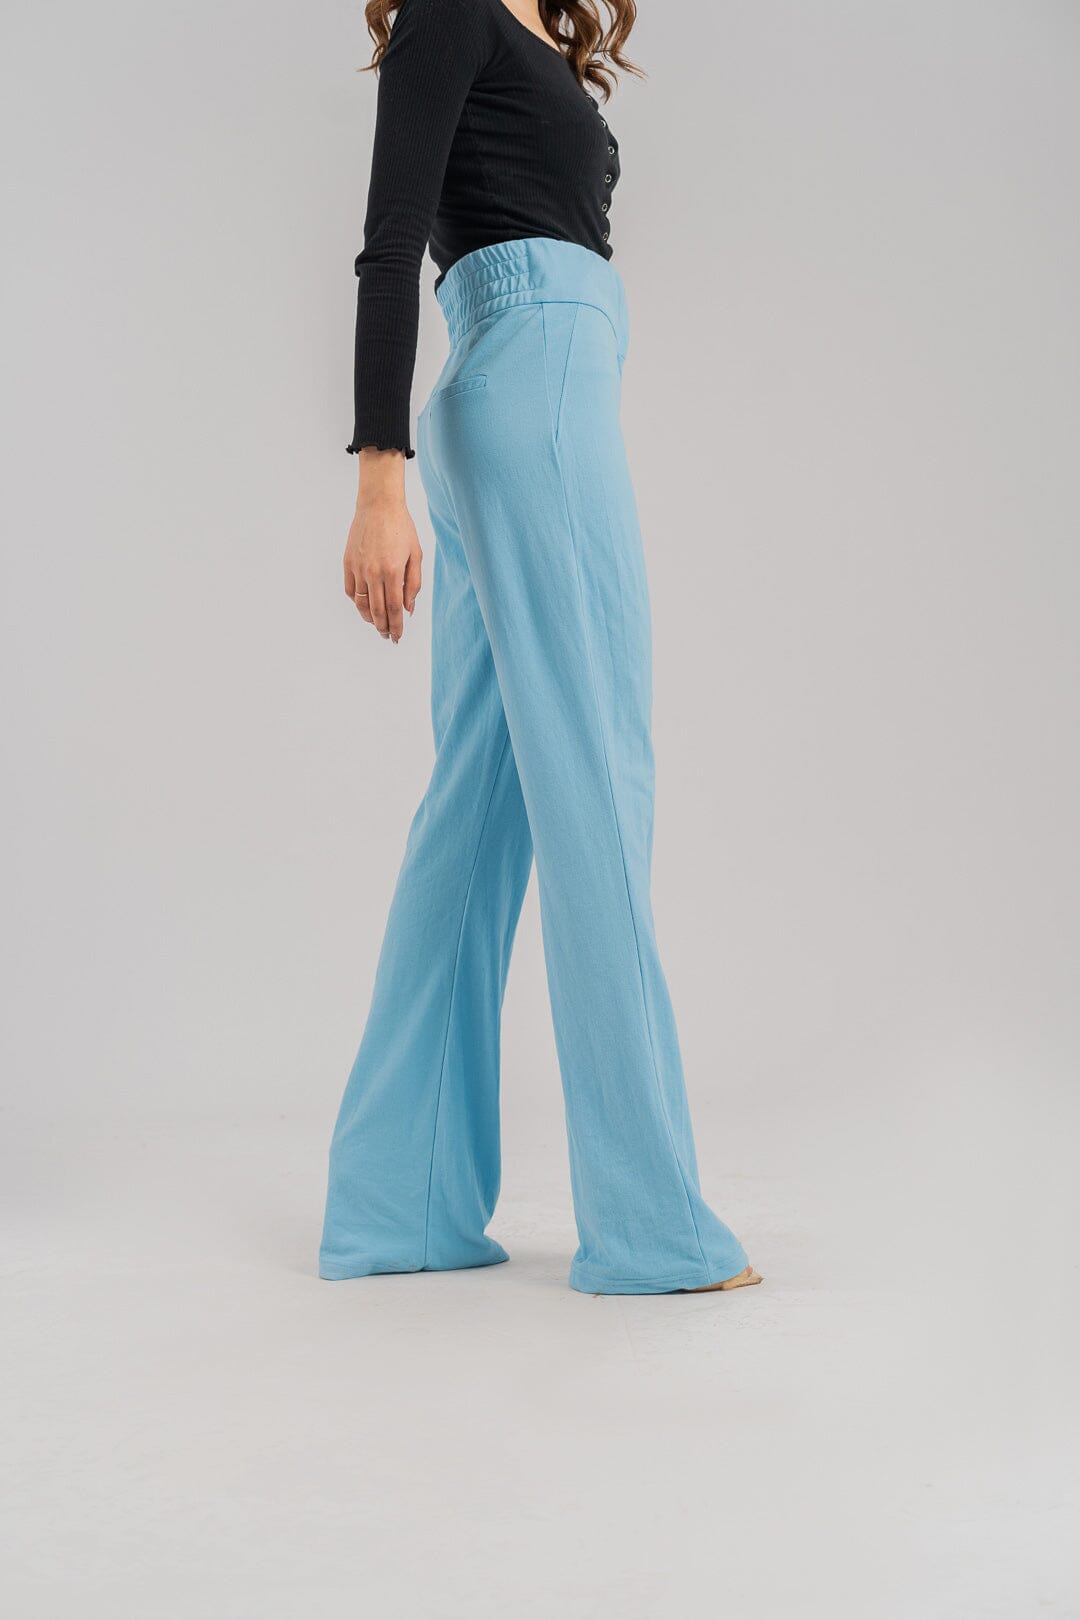 East West Women's Pique Flared Trousers Women's Trousers East West 